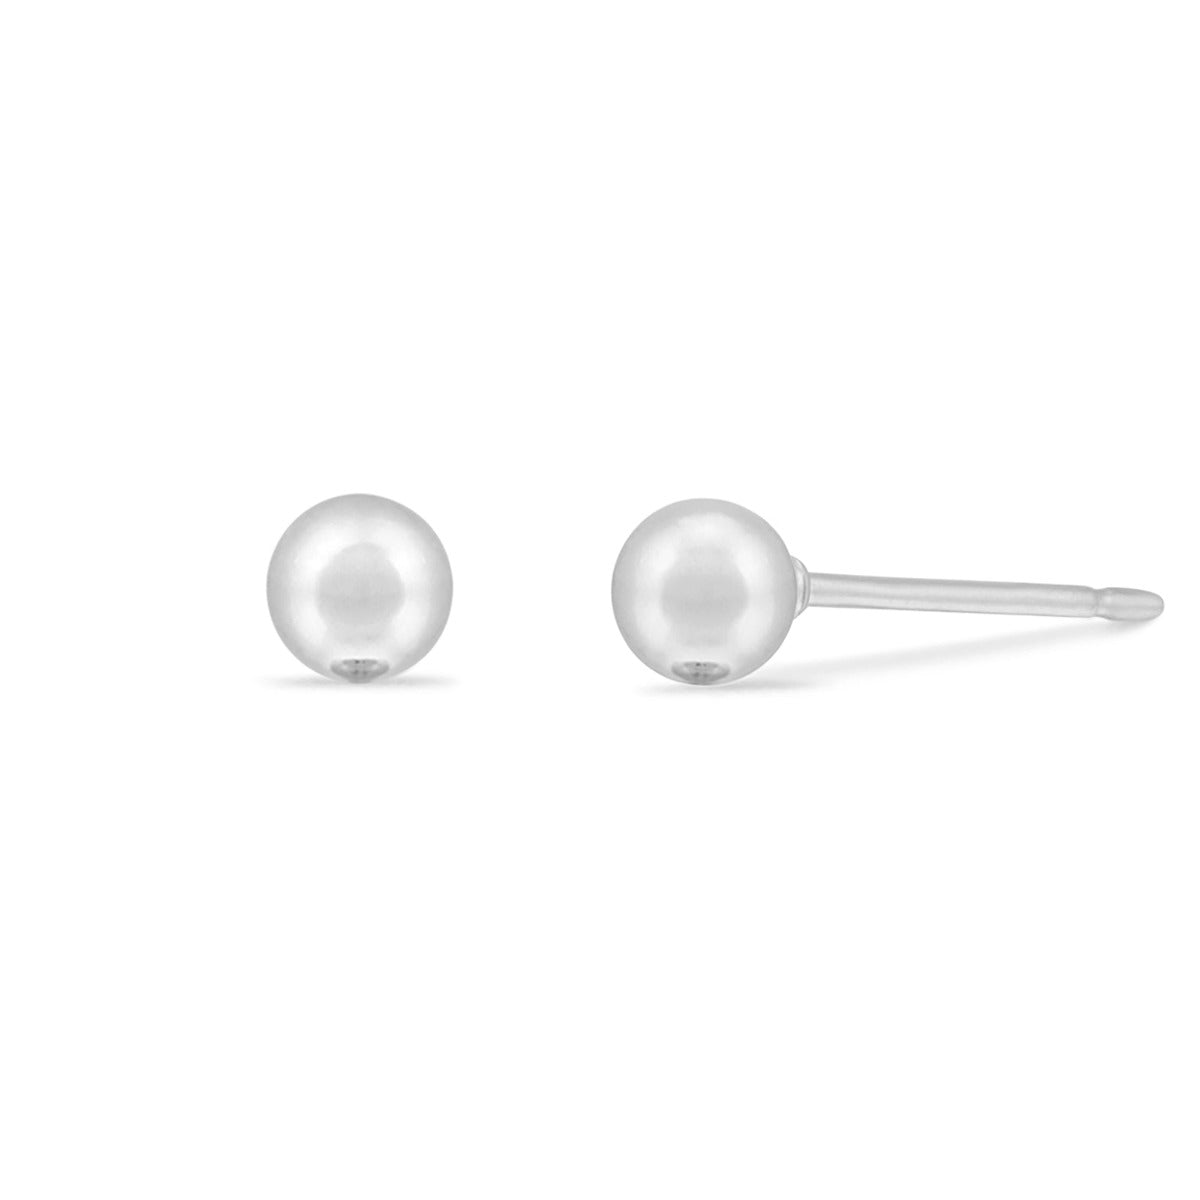 Boma Sterling Silver Post Earrings - 4mm Silver Ball    